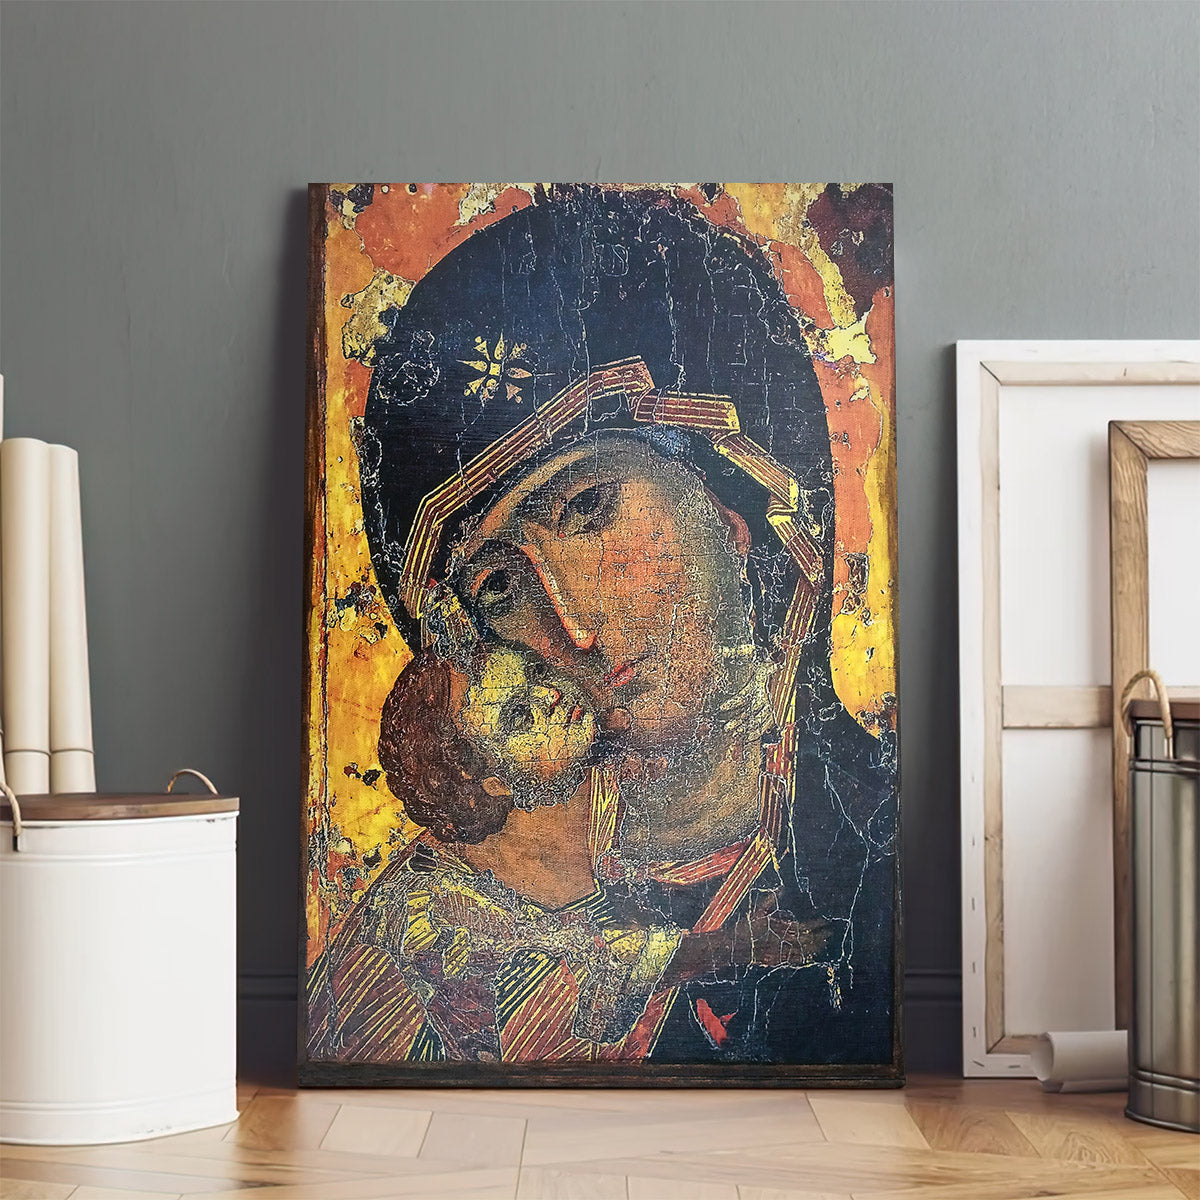 Virgin Mary Mother Of God Our Lady Of Canvas Wall Art - Catholic Canvas Wall Art - Religious Gift - Christian Wall Art Decor